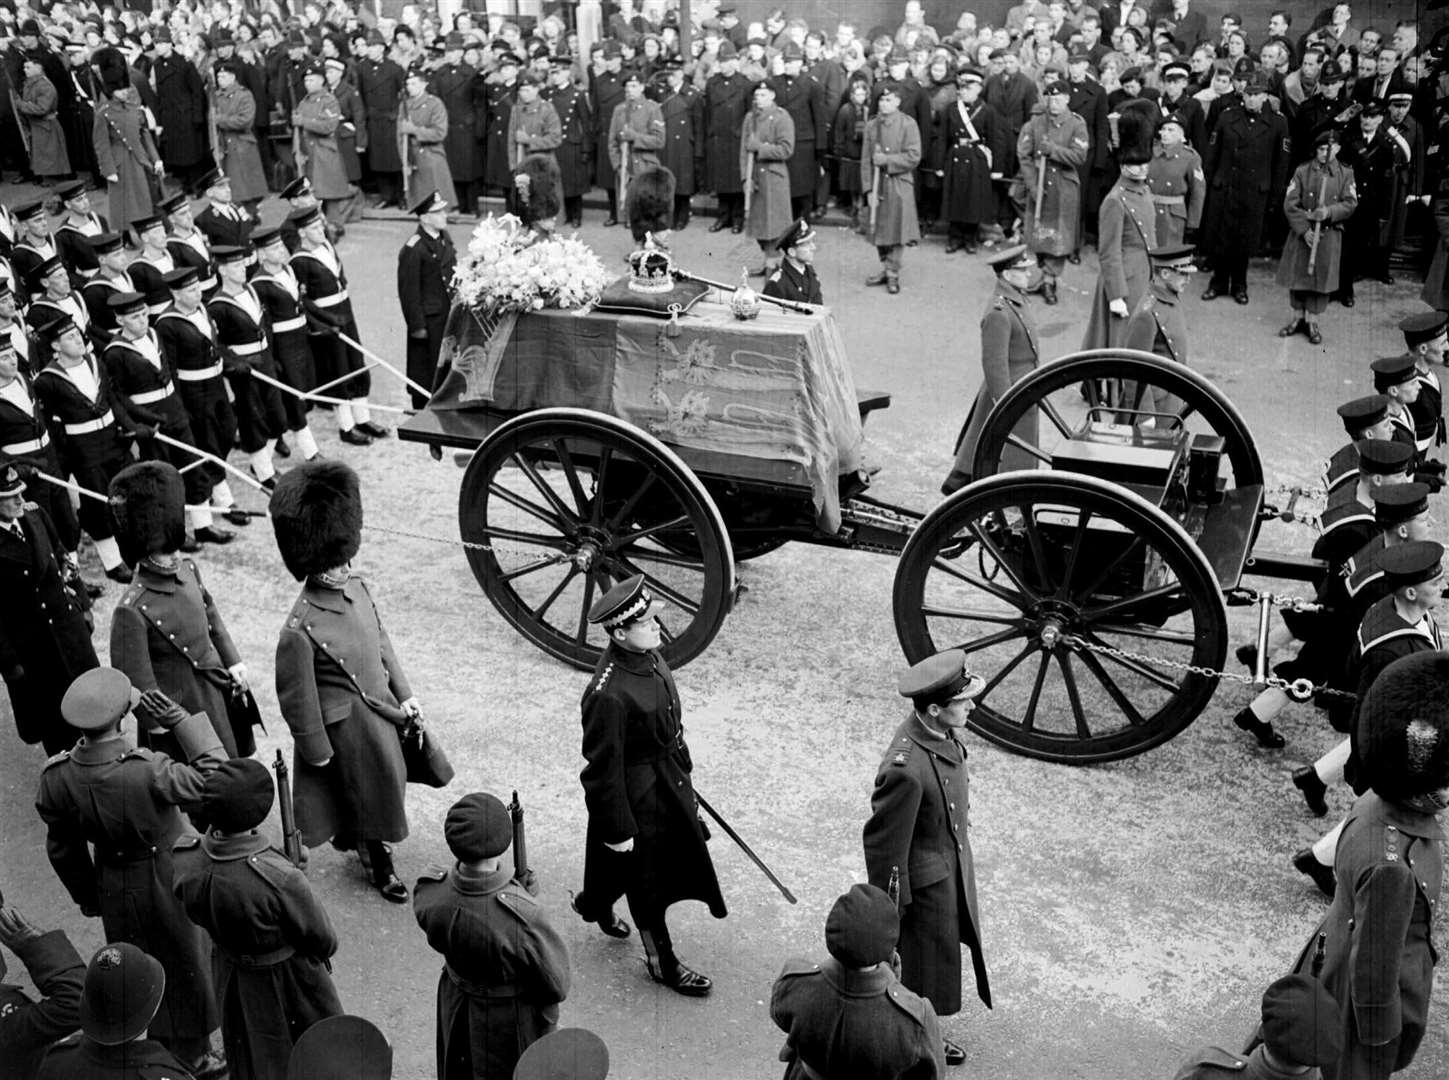 The last solemn journey of King George VI, when his coffin was pulled on ropes by sailors in procession from Windsor railway station to the funeral service in St George’s Chapel (PA)